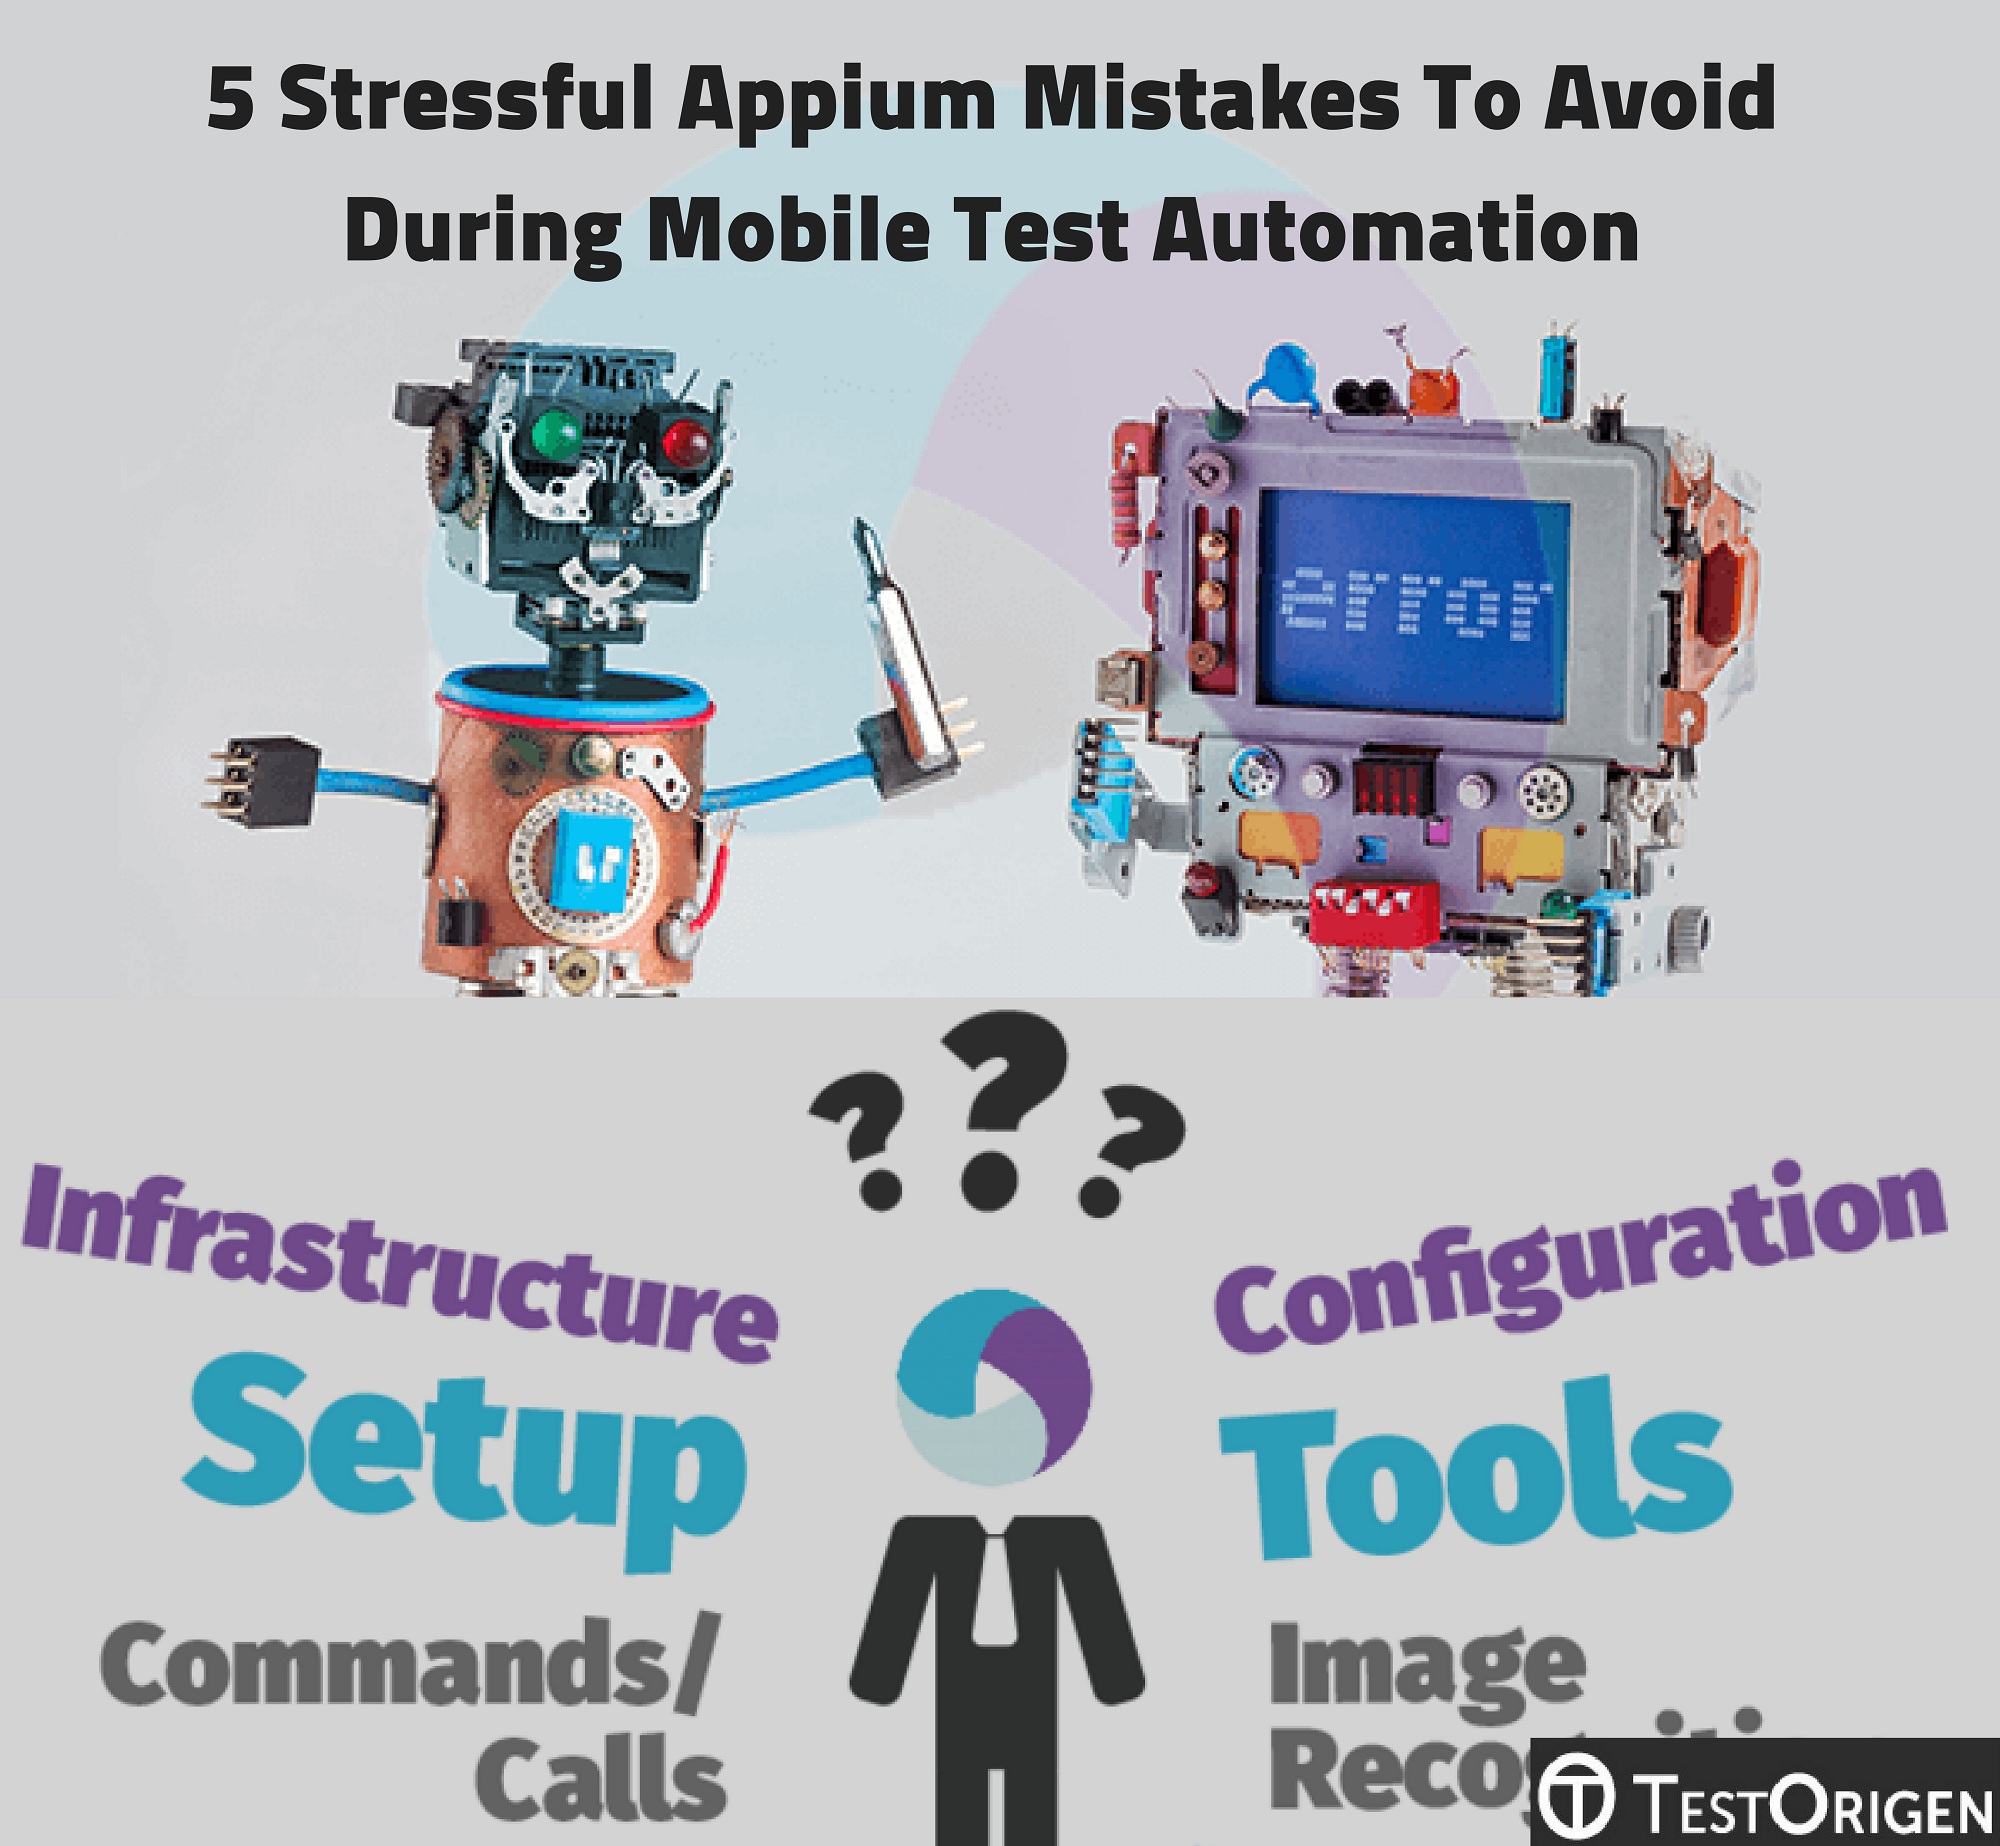 5 Stressful Appium Mistakes To Avoid During Mobile Test Automation